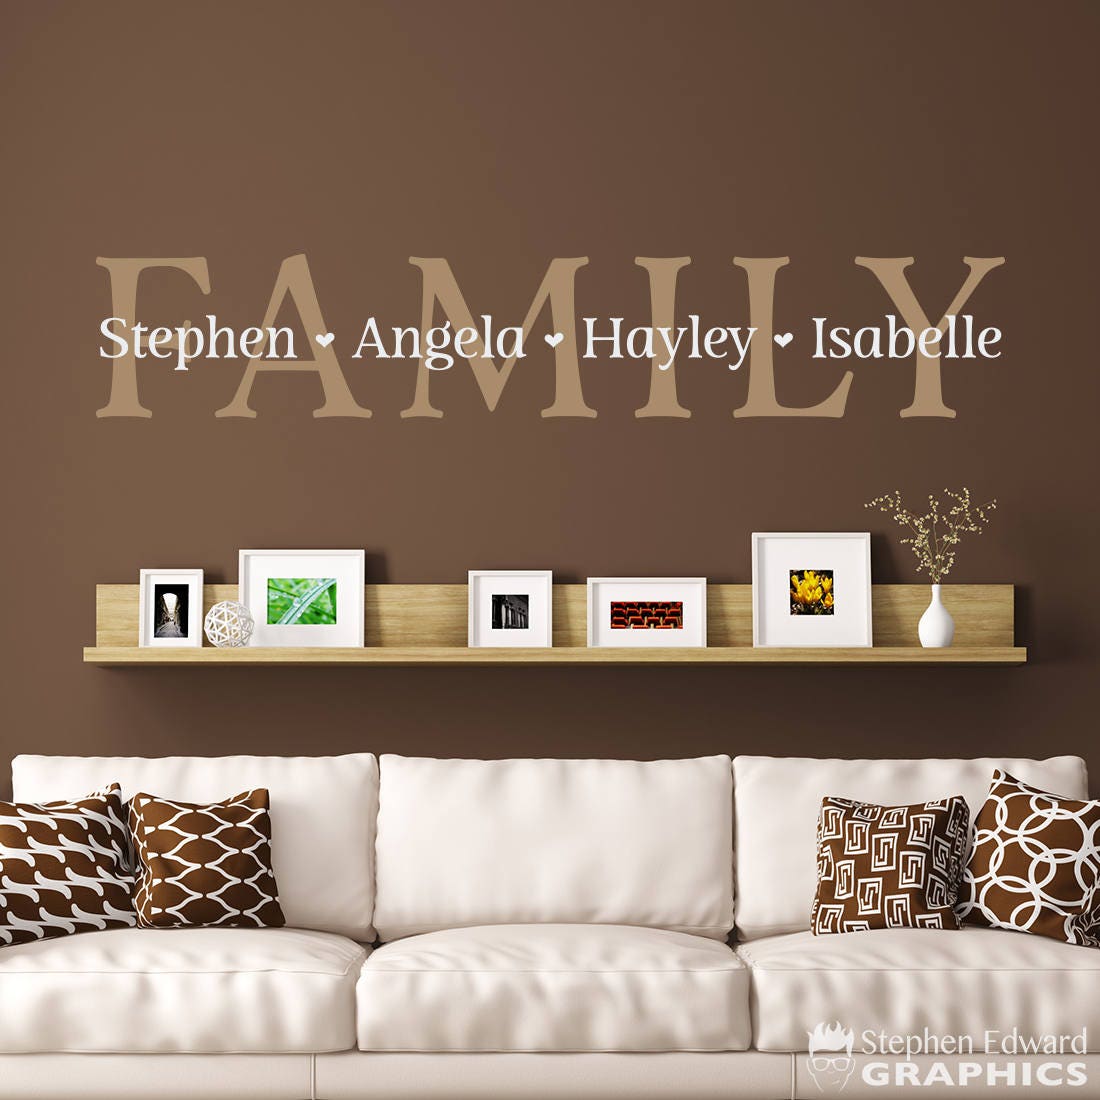 Family Wall Decal with names - Personalized Decal - Gallery Wall Decor